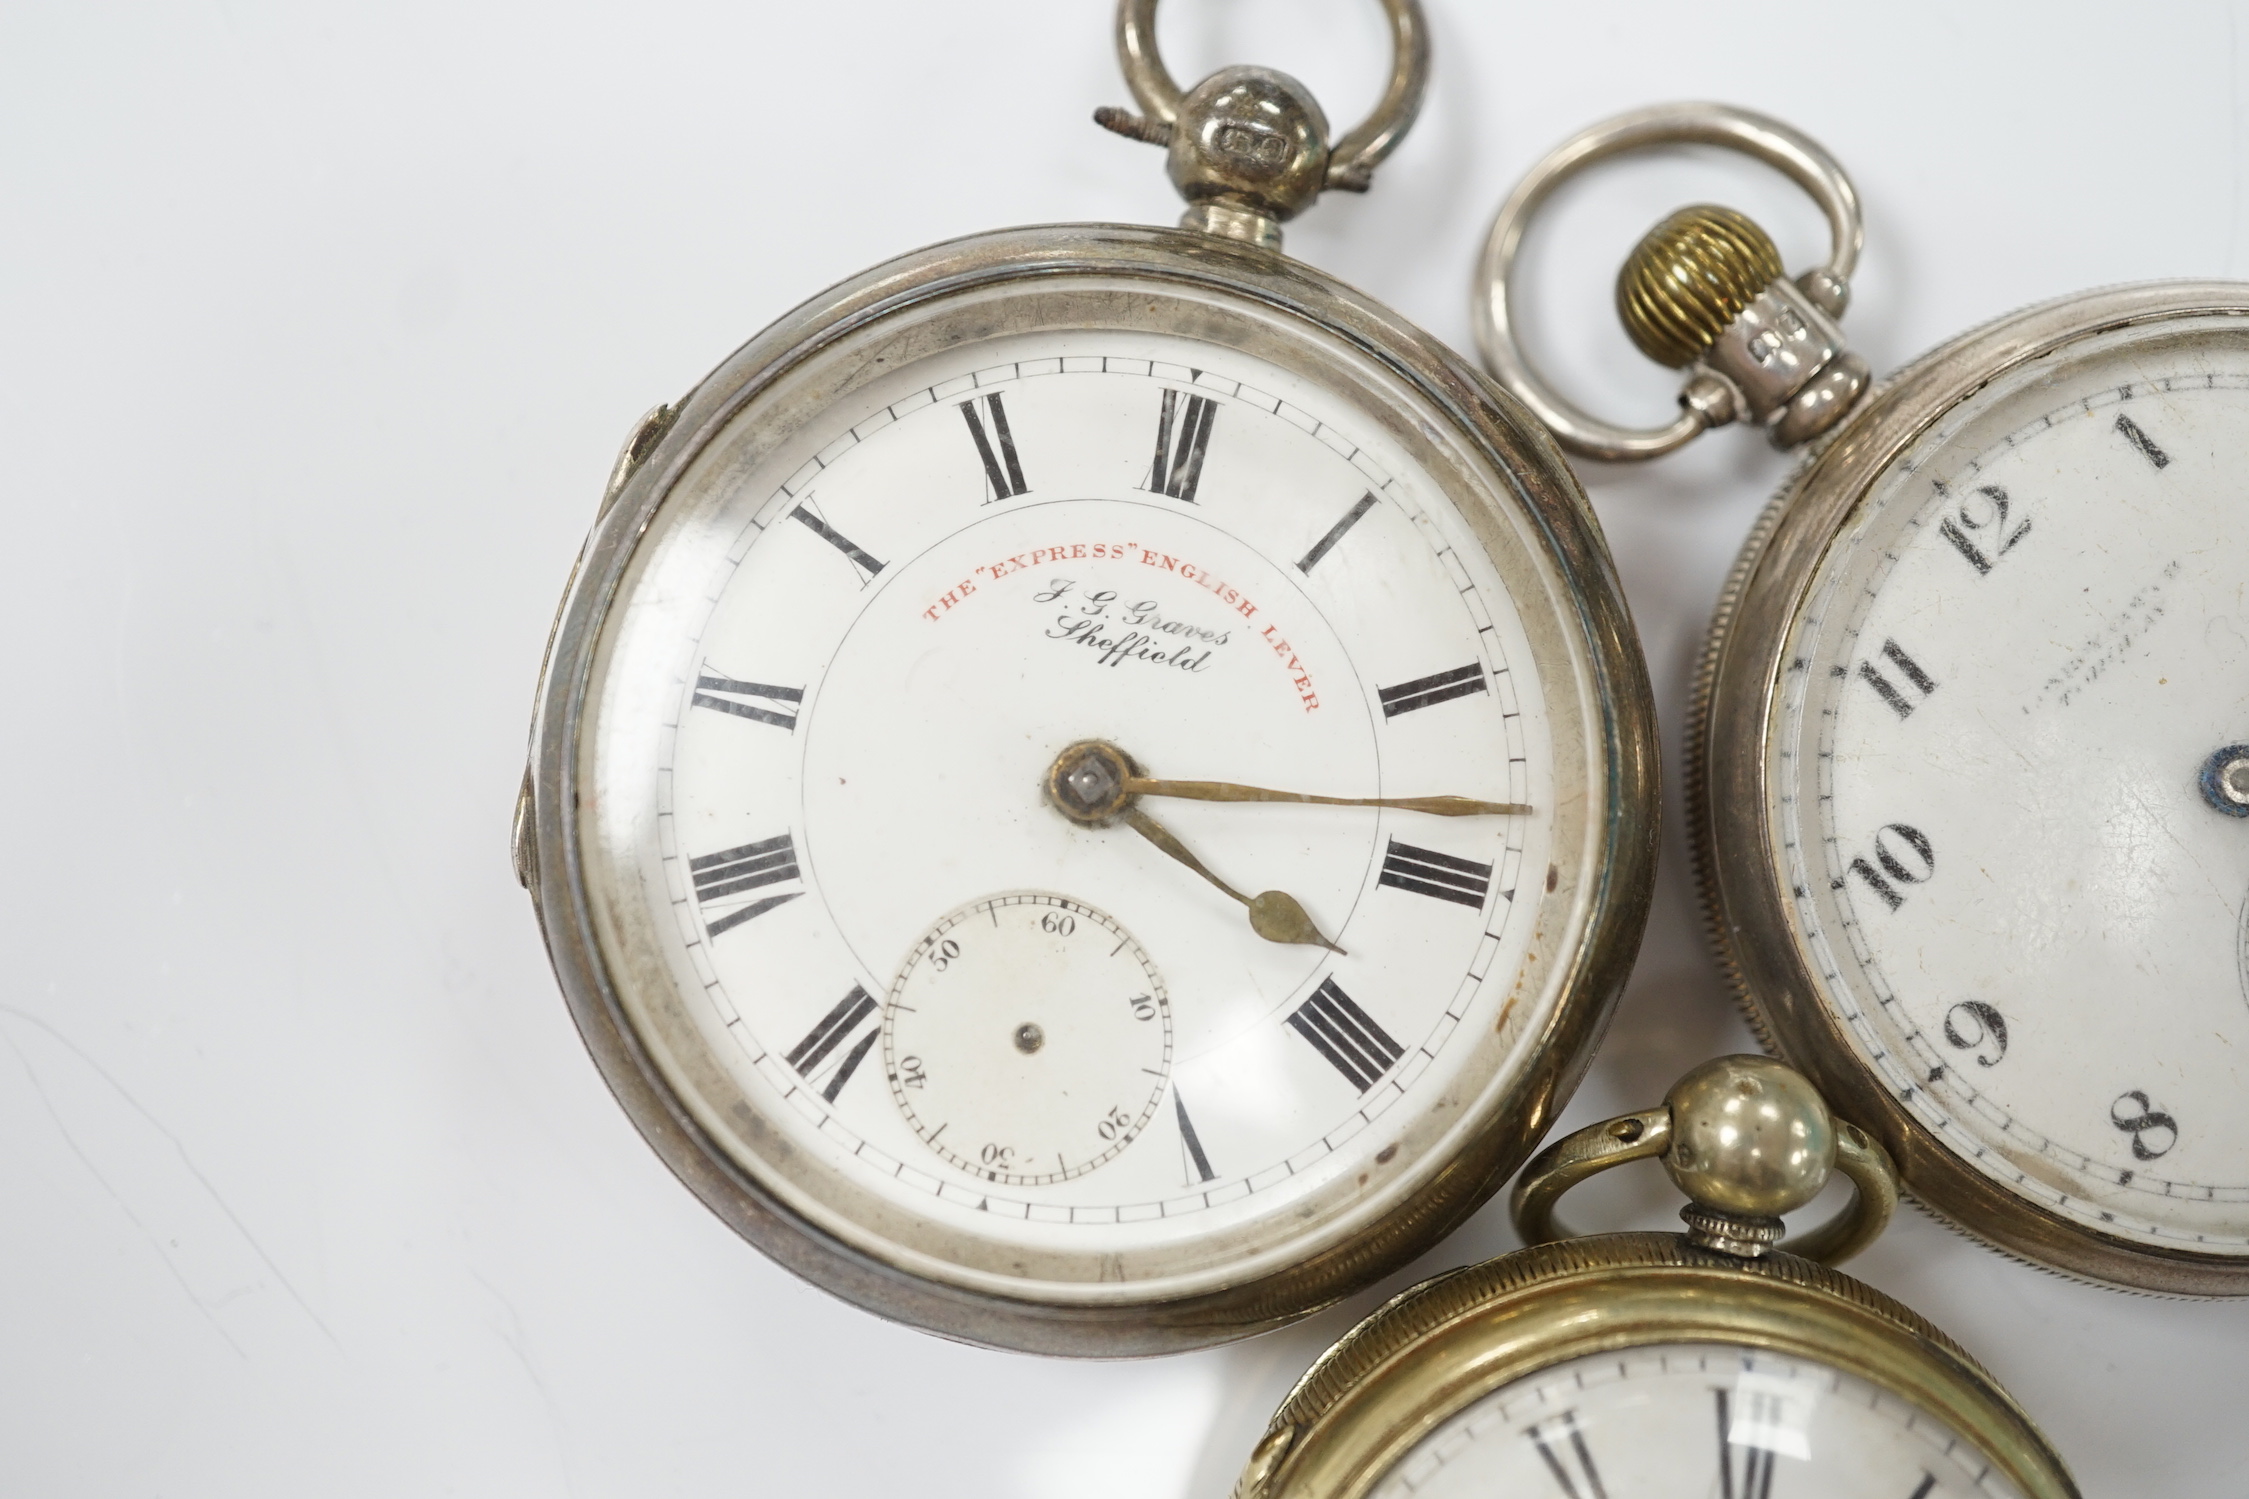 A Georgian gilt metal pair cased pocket watch (lacking outer case) by Masters of Piccadilly, with Roman dial, together with two early 20th century silver open face pocket watches including 'Express English Lever'.